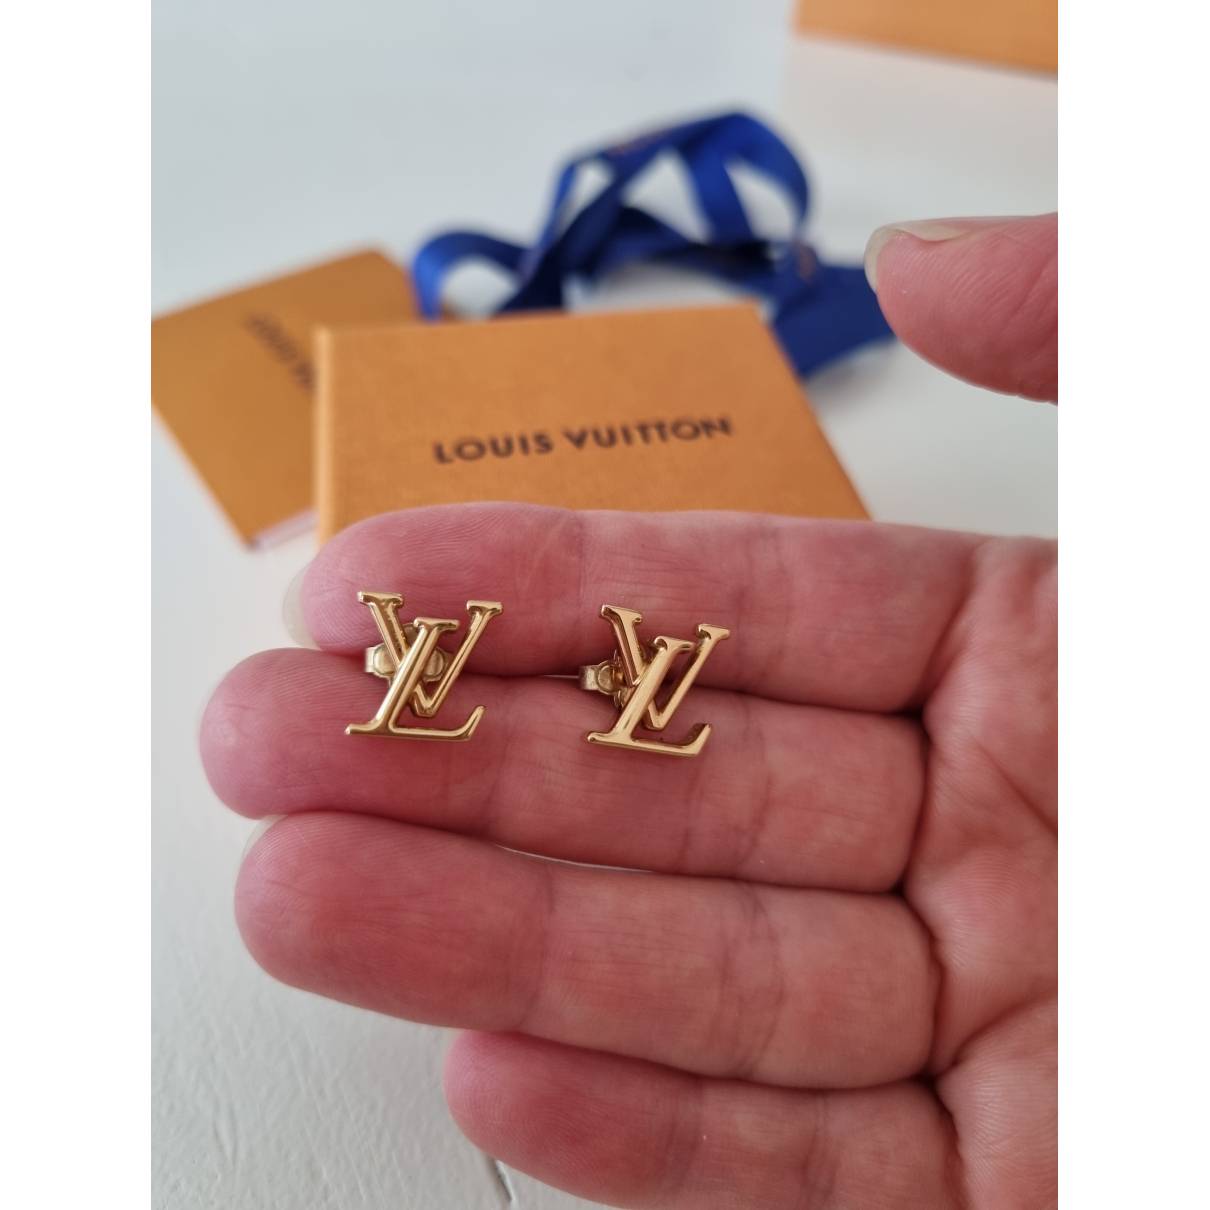 Authenticated used Louis Vuitton Iconic M00986 Brand Accessories Earrings Ladies, Adult Unisex, Size: One size, Gold